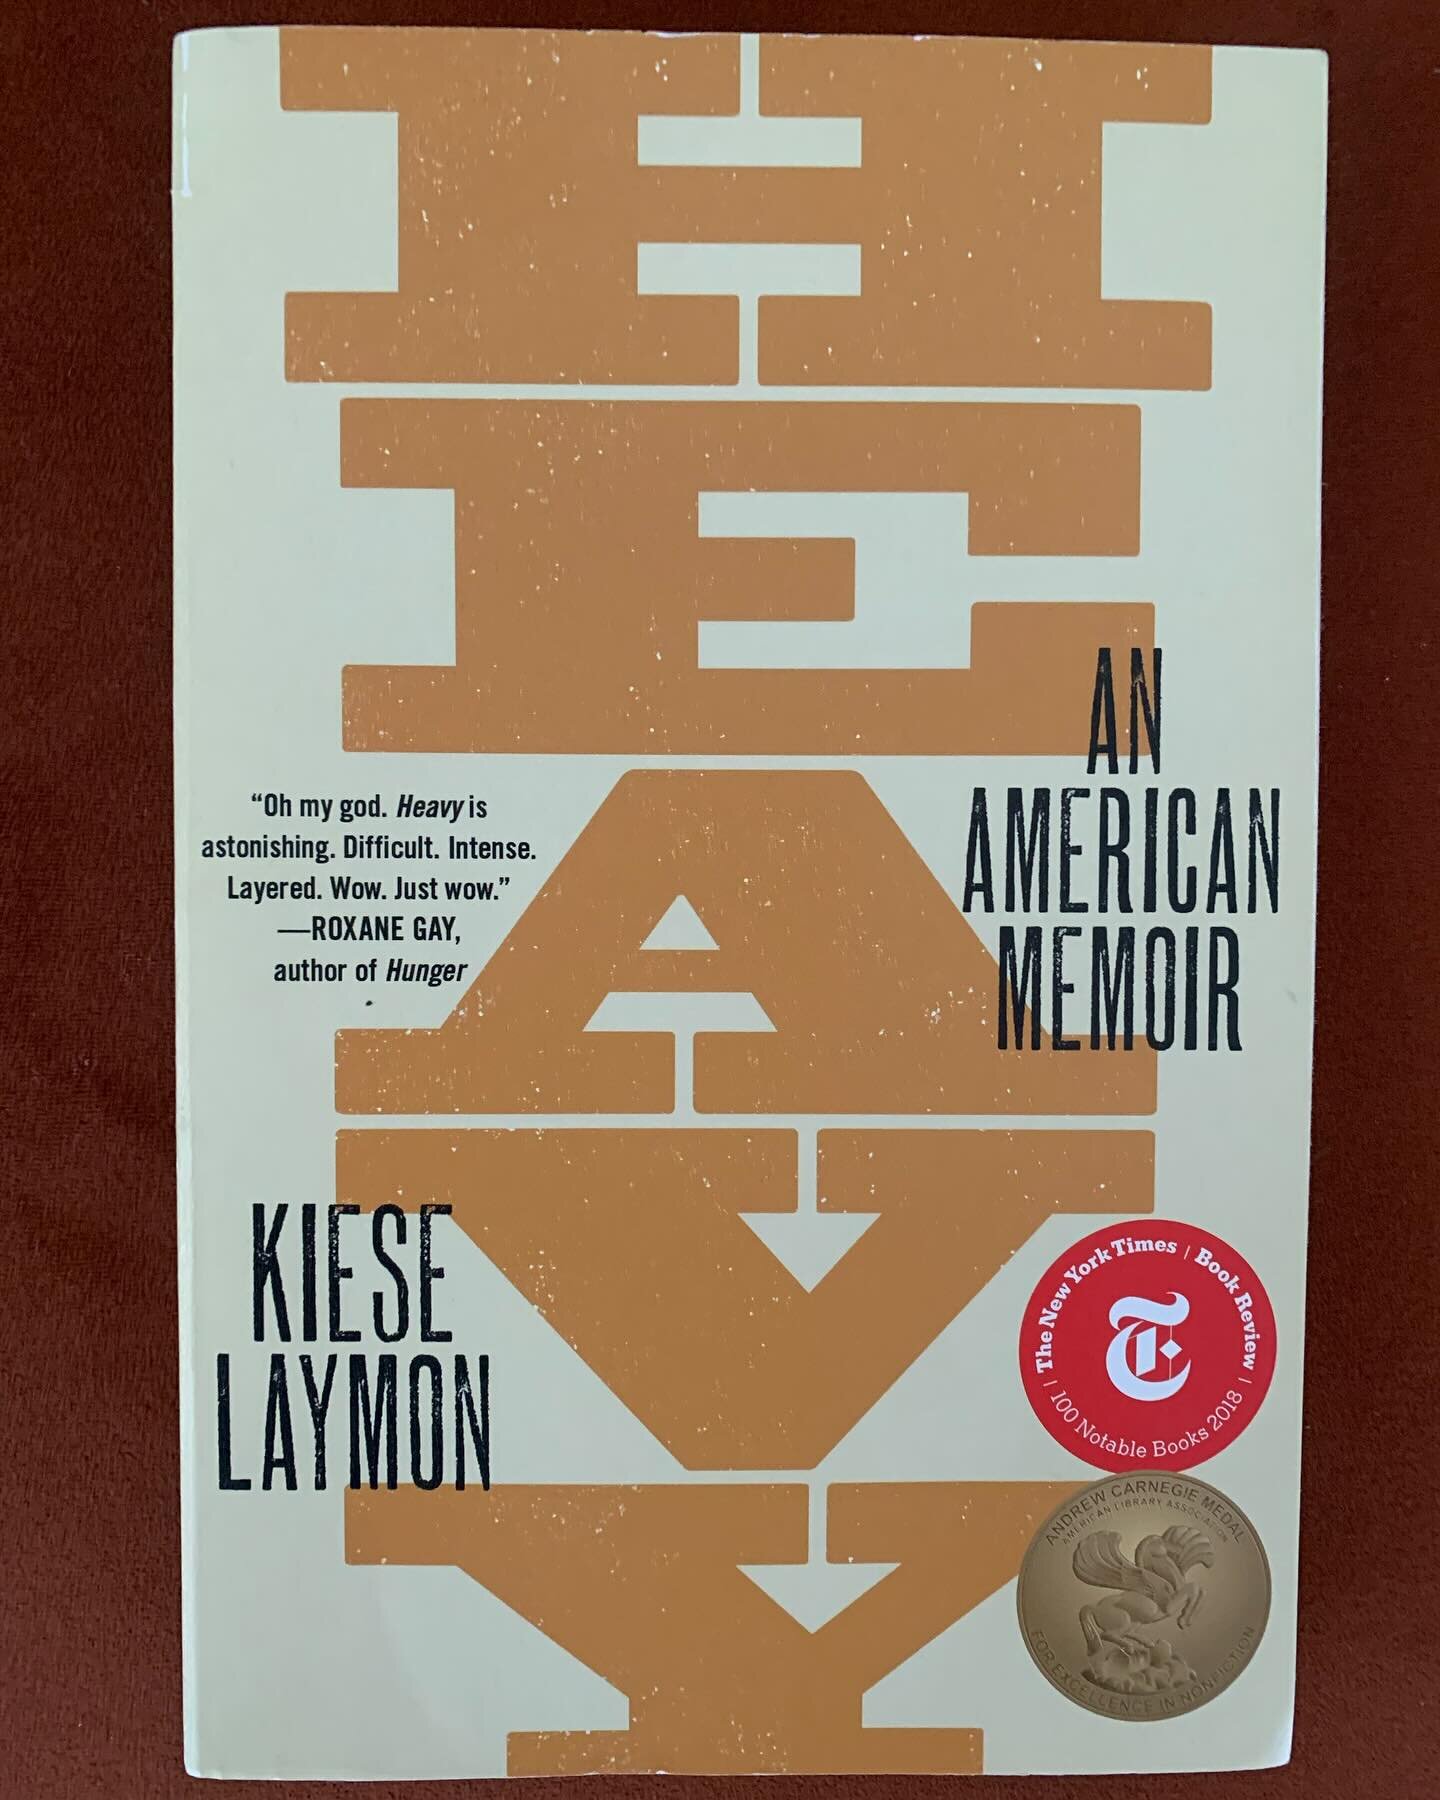 14th book of this year blew my mind. There are so many unforgettable passages in these pages, so here&rsquo;s a short clip of one: Both of y&rsquo;all knew, and showed me, how we didn&rsquo;t even have to win for white folk to punish us. All we had t